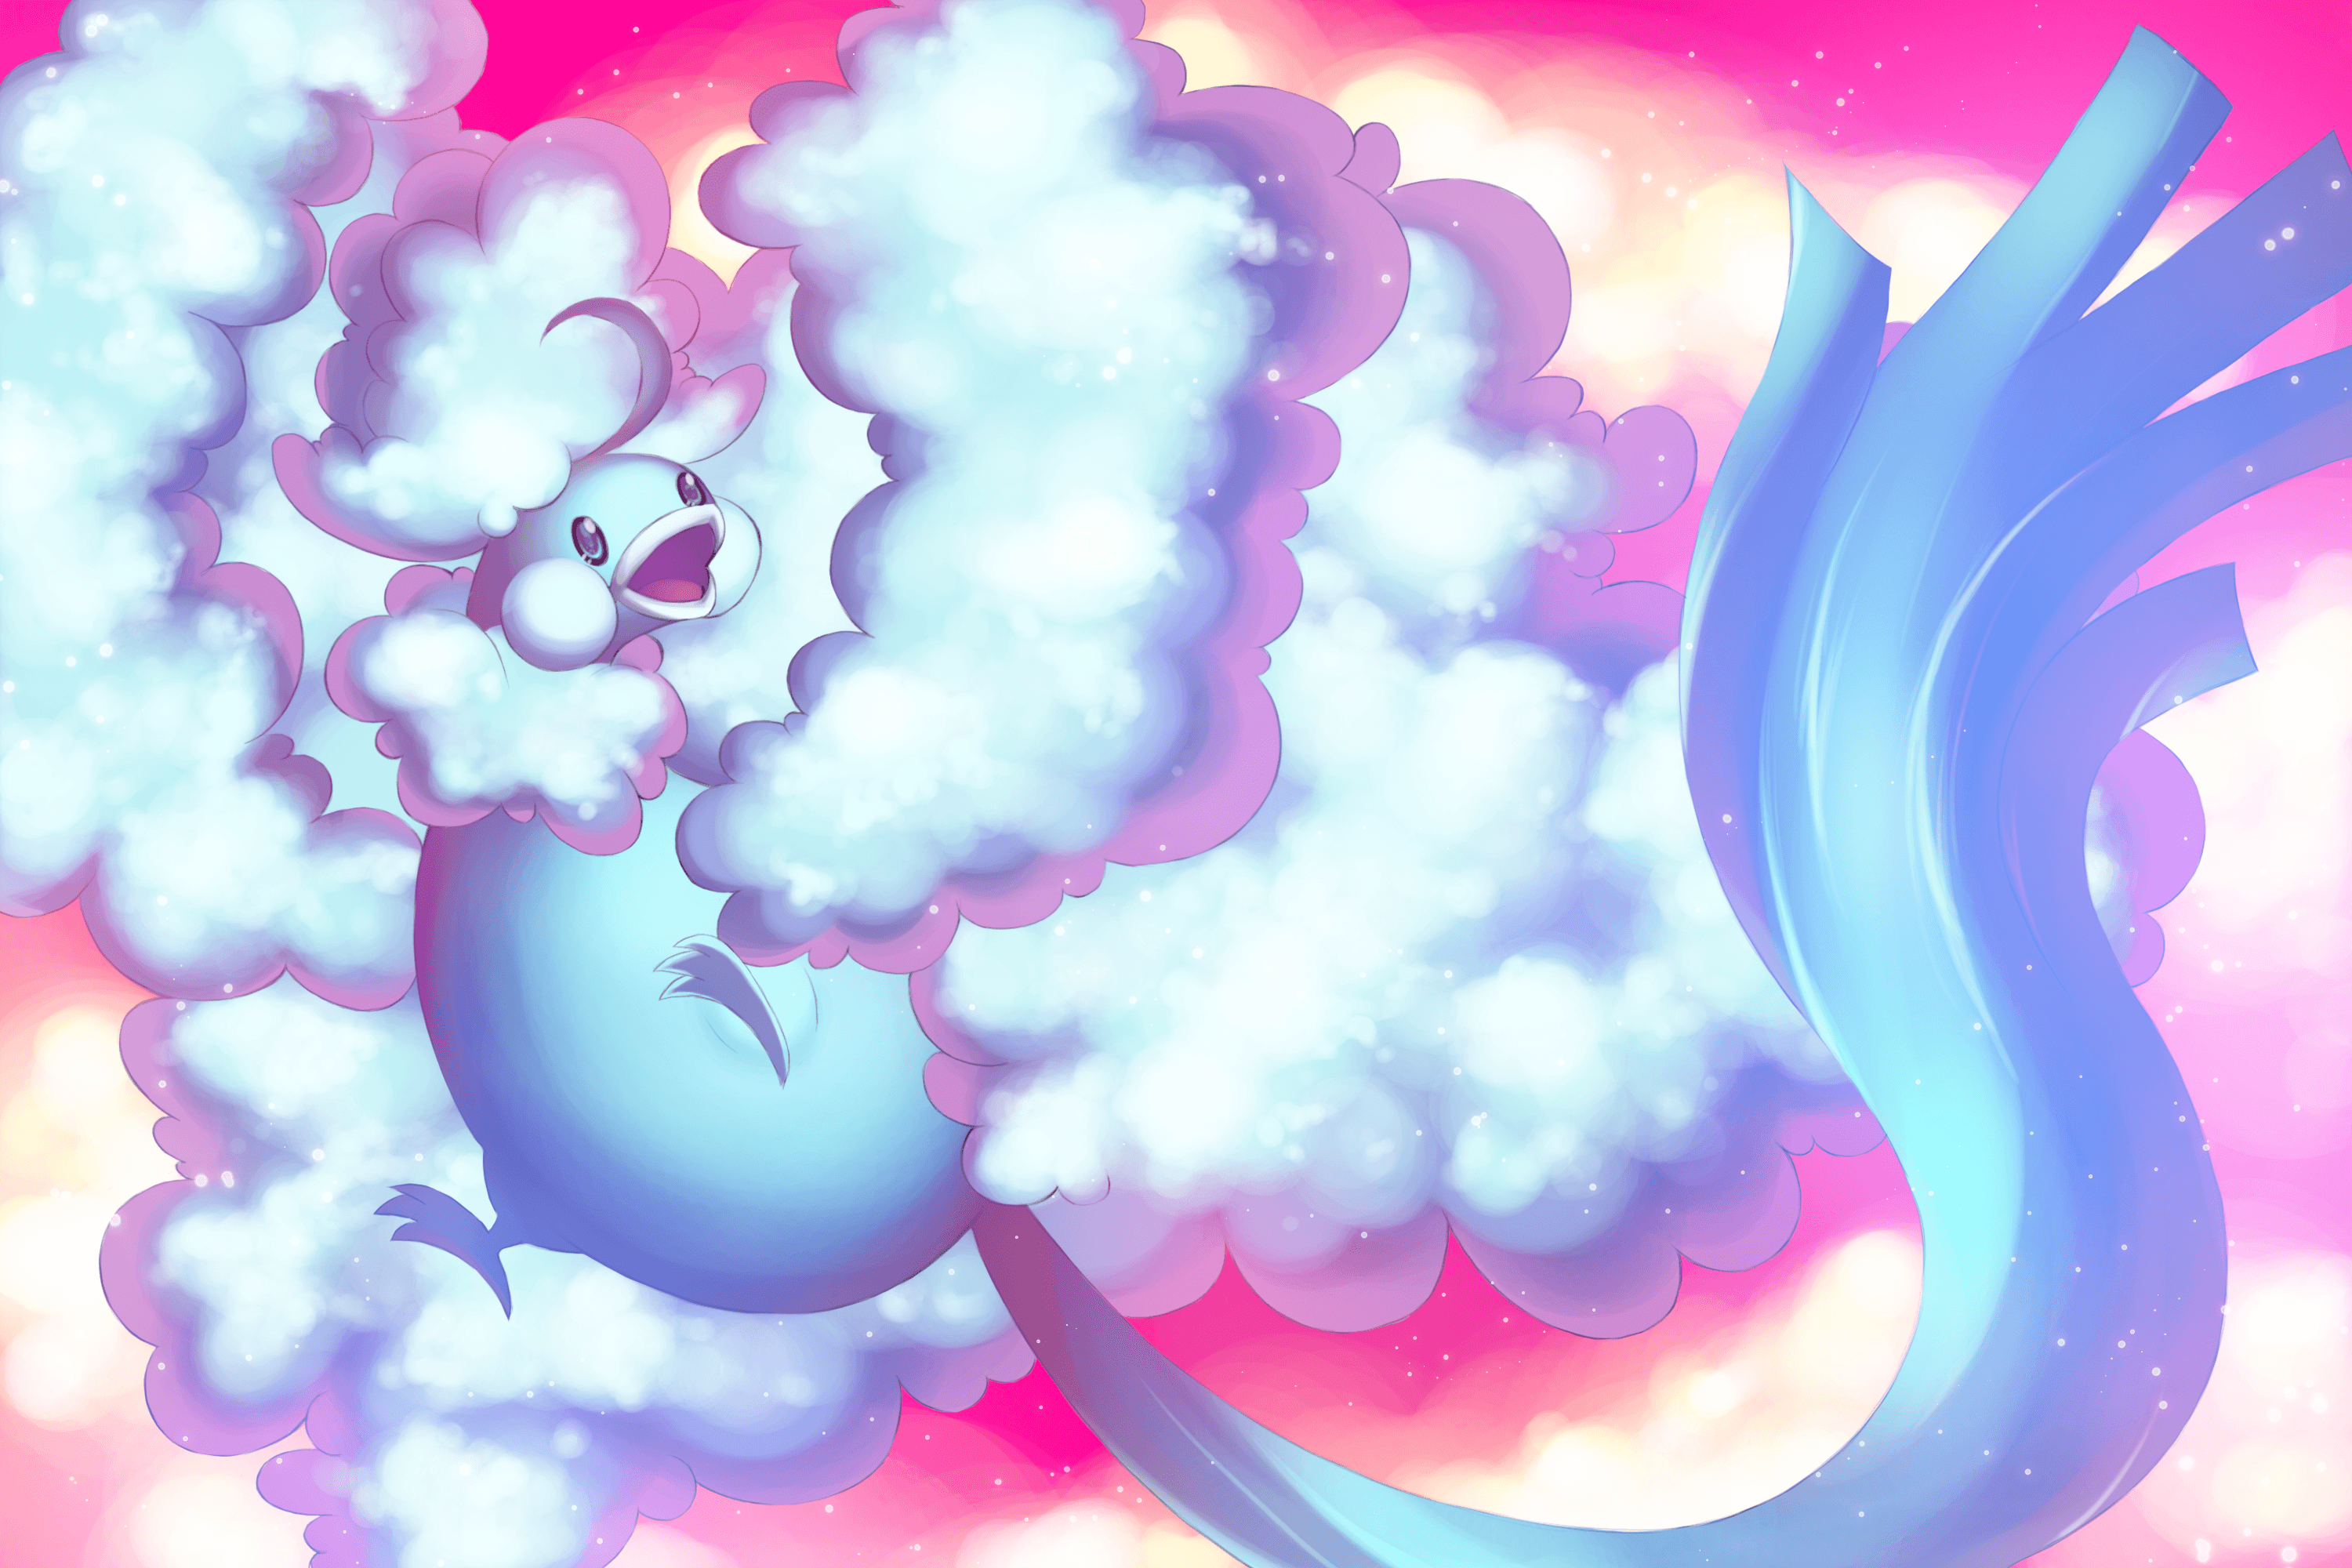 Altaria (Pokémon) HD Wallpaper and Background Image